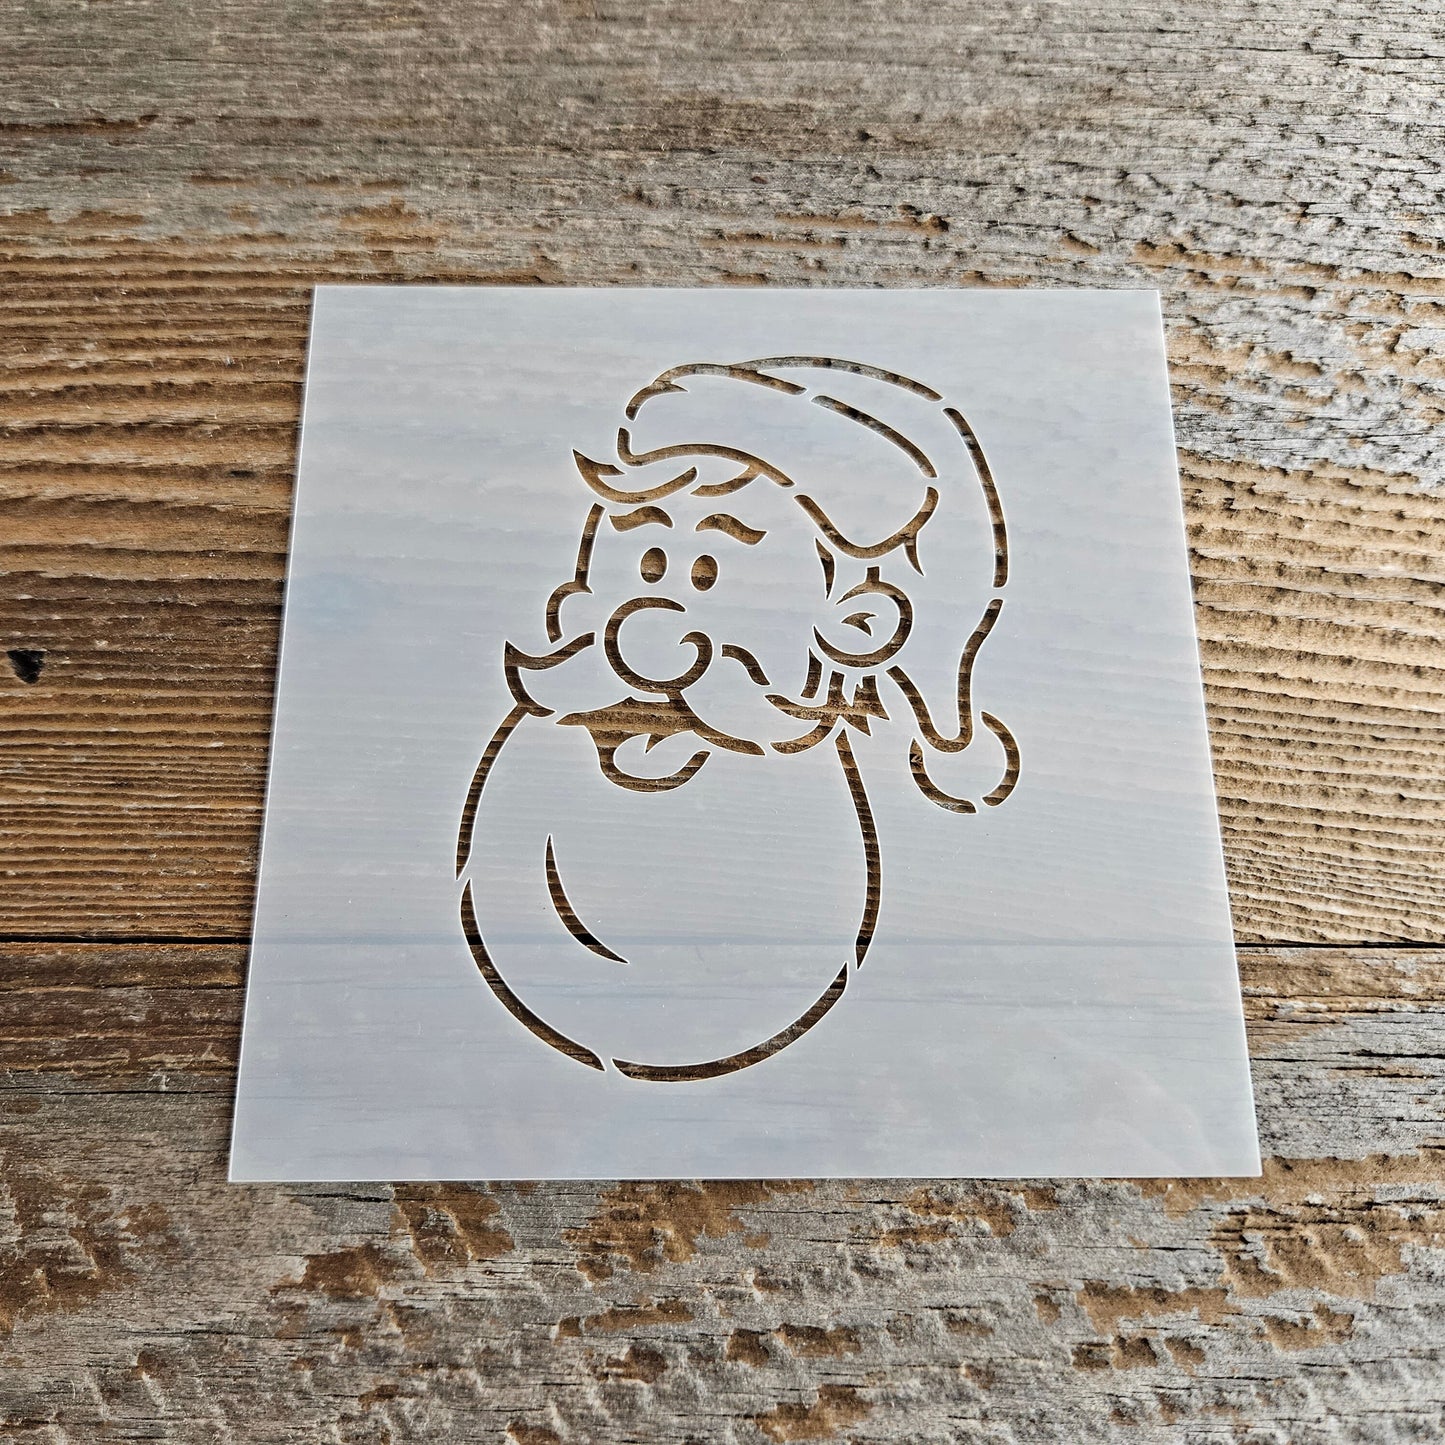 Santa Face Stencil Reusable Cookie Decorating Craft Painting Windows Signs Mylar Many Sizes Christmas Winter Cartoon Rounded Beard